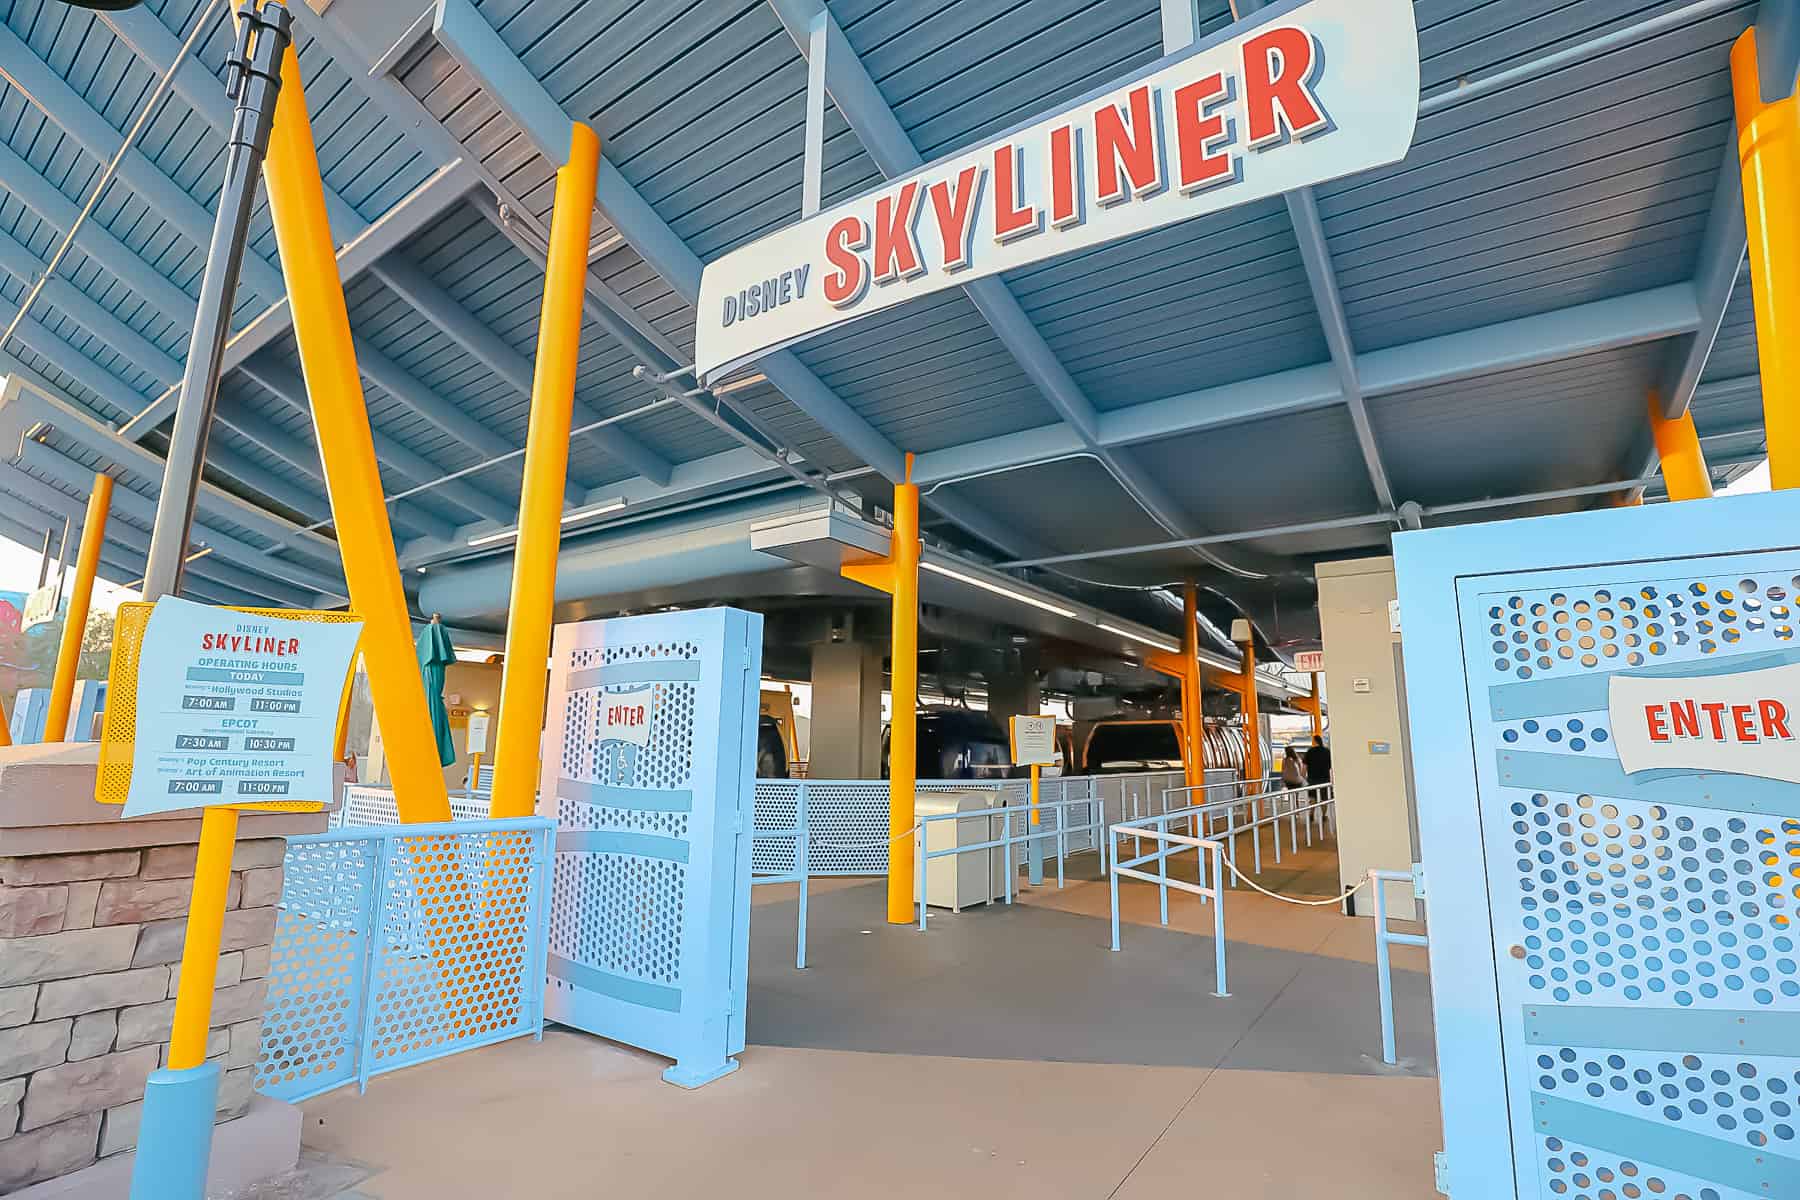 Disney Skyliner station shared between Art of Animation and Pop Century 